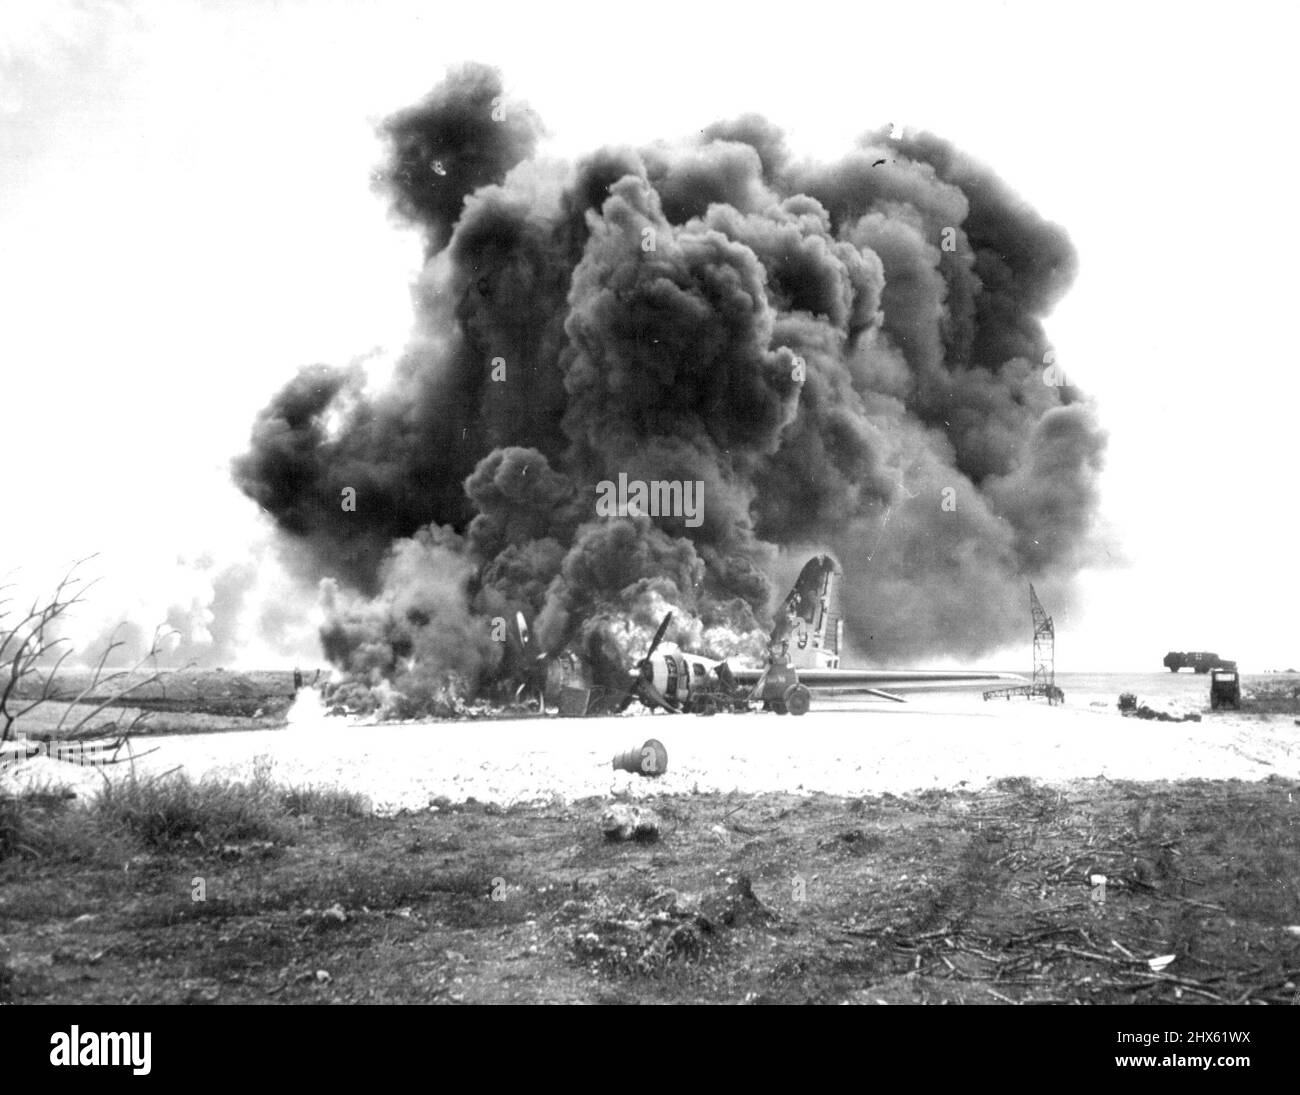 B-29 Burns After Jap Attack on Saipan - An American B-29 superfortress burns on Saipan Island, in the Marianas, after Jap planes strafed the airfield. December 27, 1944. (Photo by Associated Press Photo).;B-29 Burns After Jap Attack on Saipan - An American B-29 superfortress burns on Saipan Island, in the Marianas, after Jap planes strafed the airfield. Stock Photo